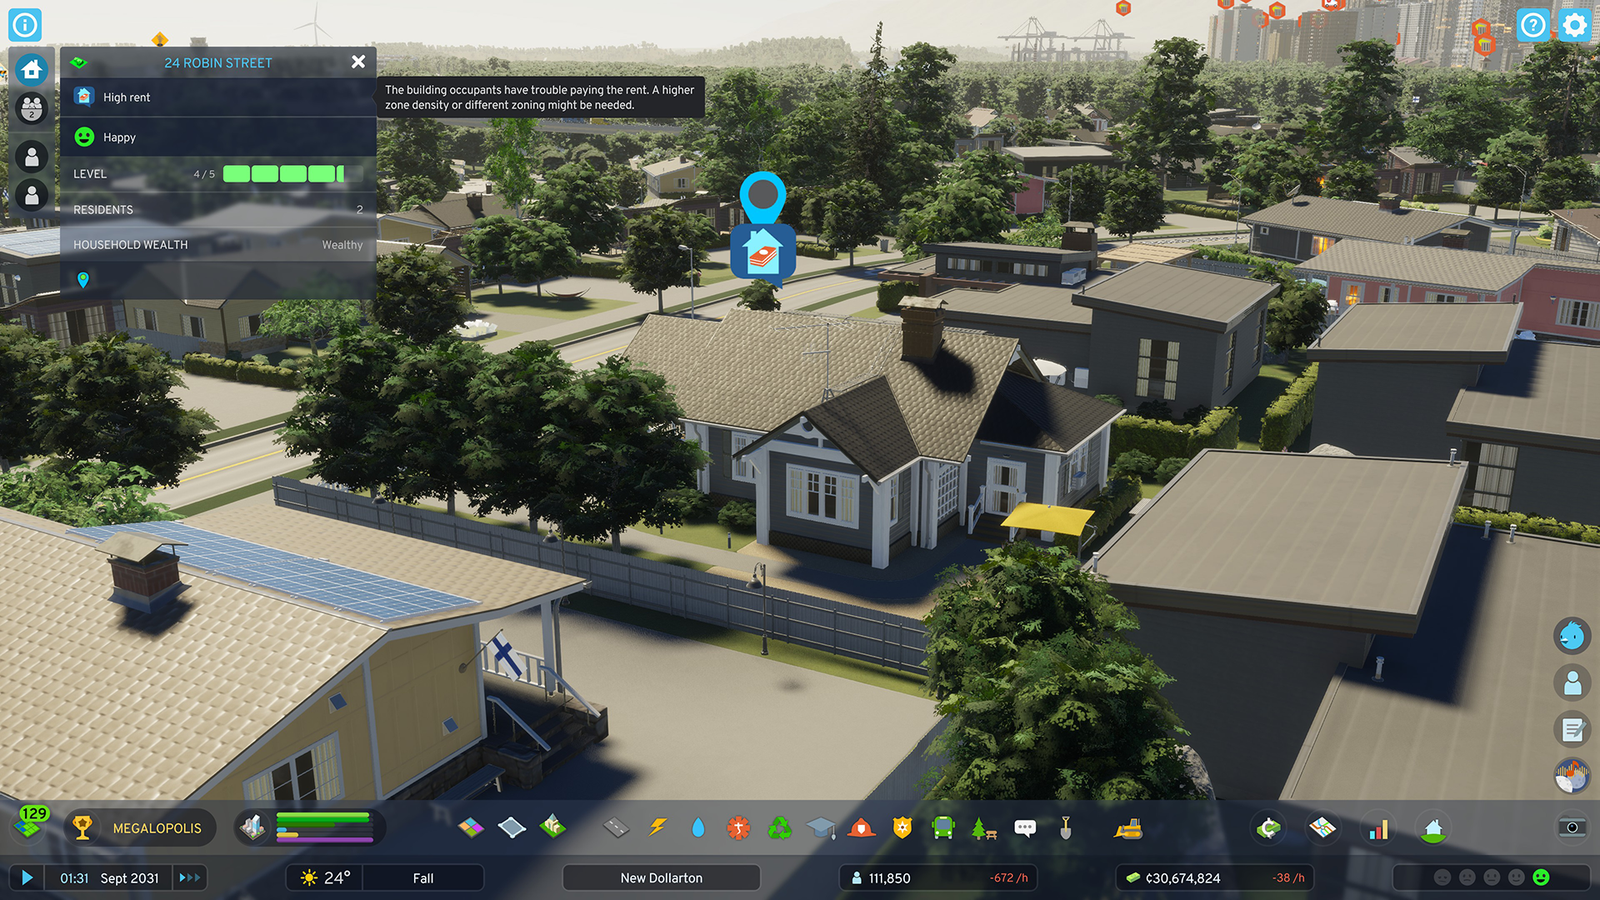 GameNonStop promoting Cities: Skylines 2 is packed with customers